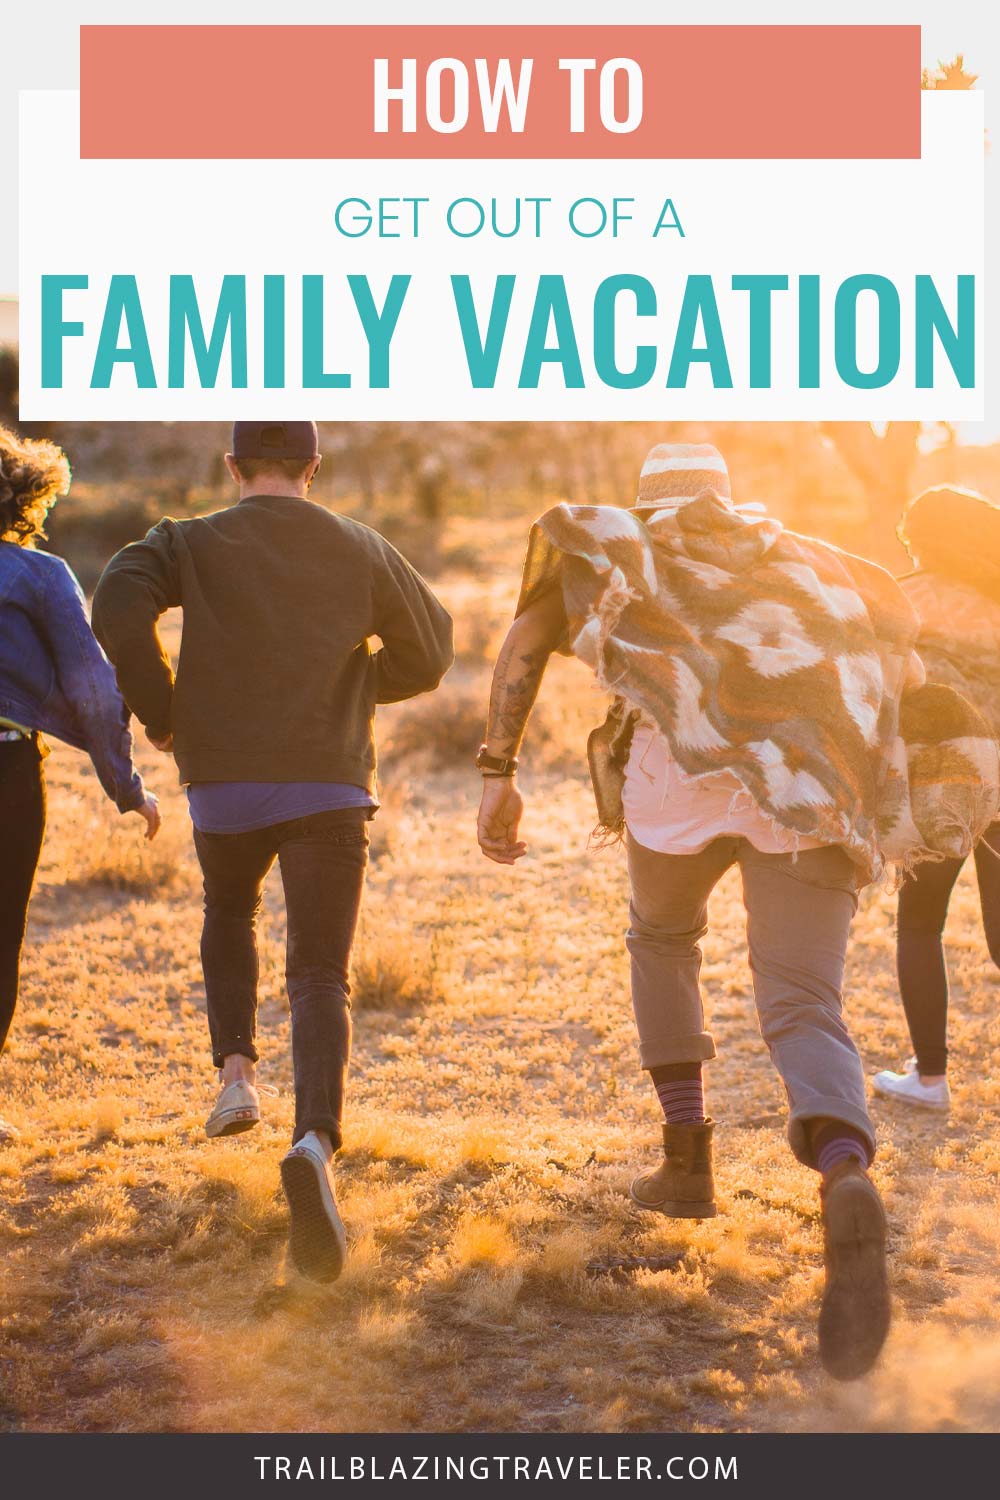 How to Get Out of a Family Vacation